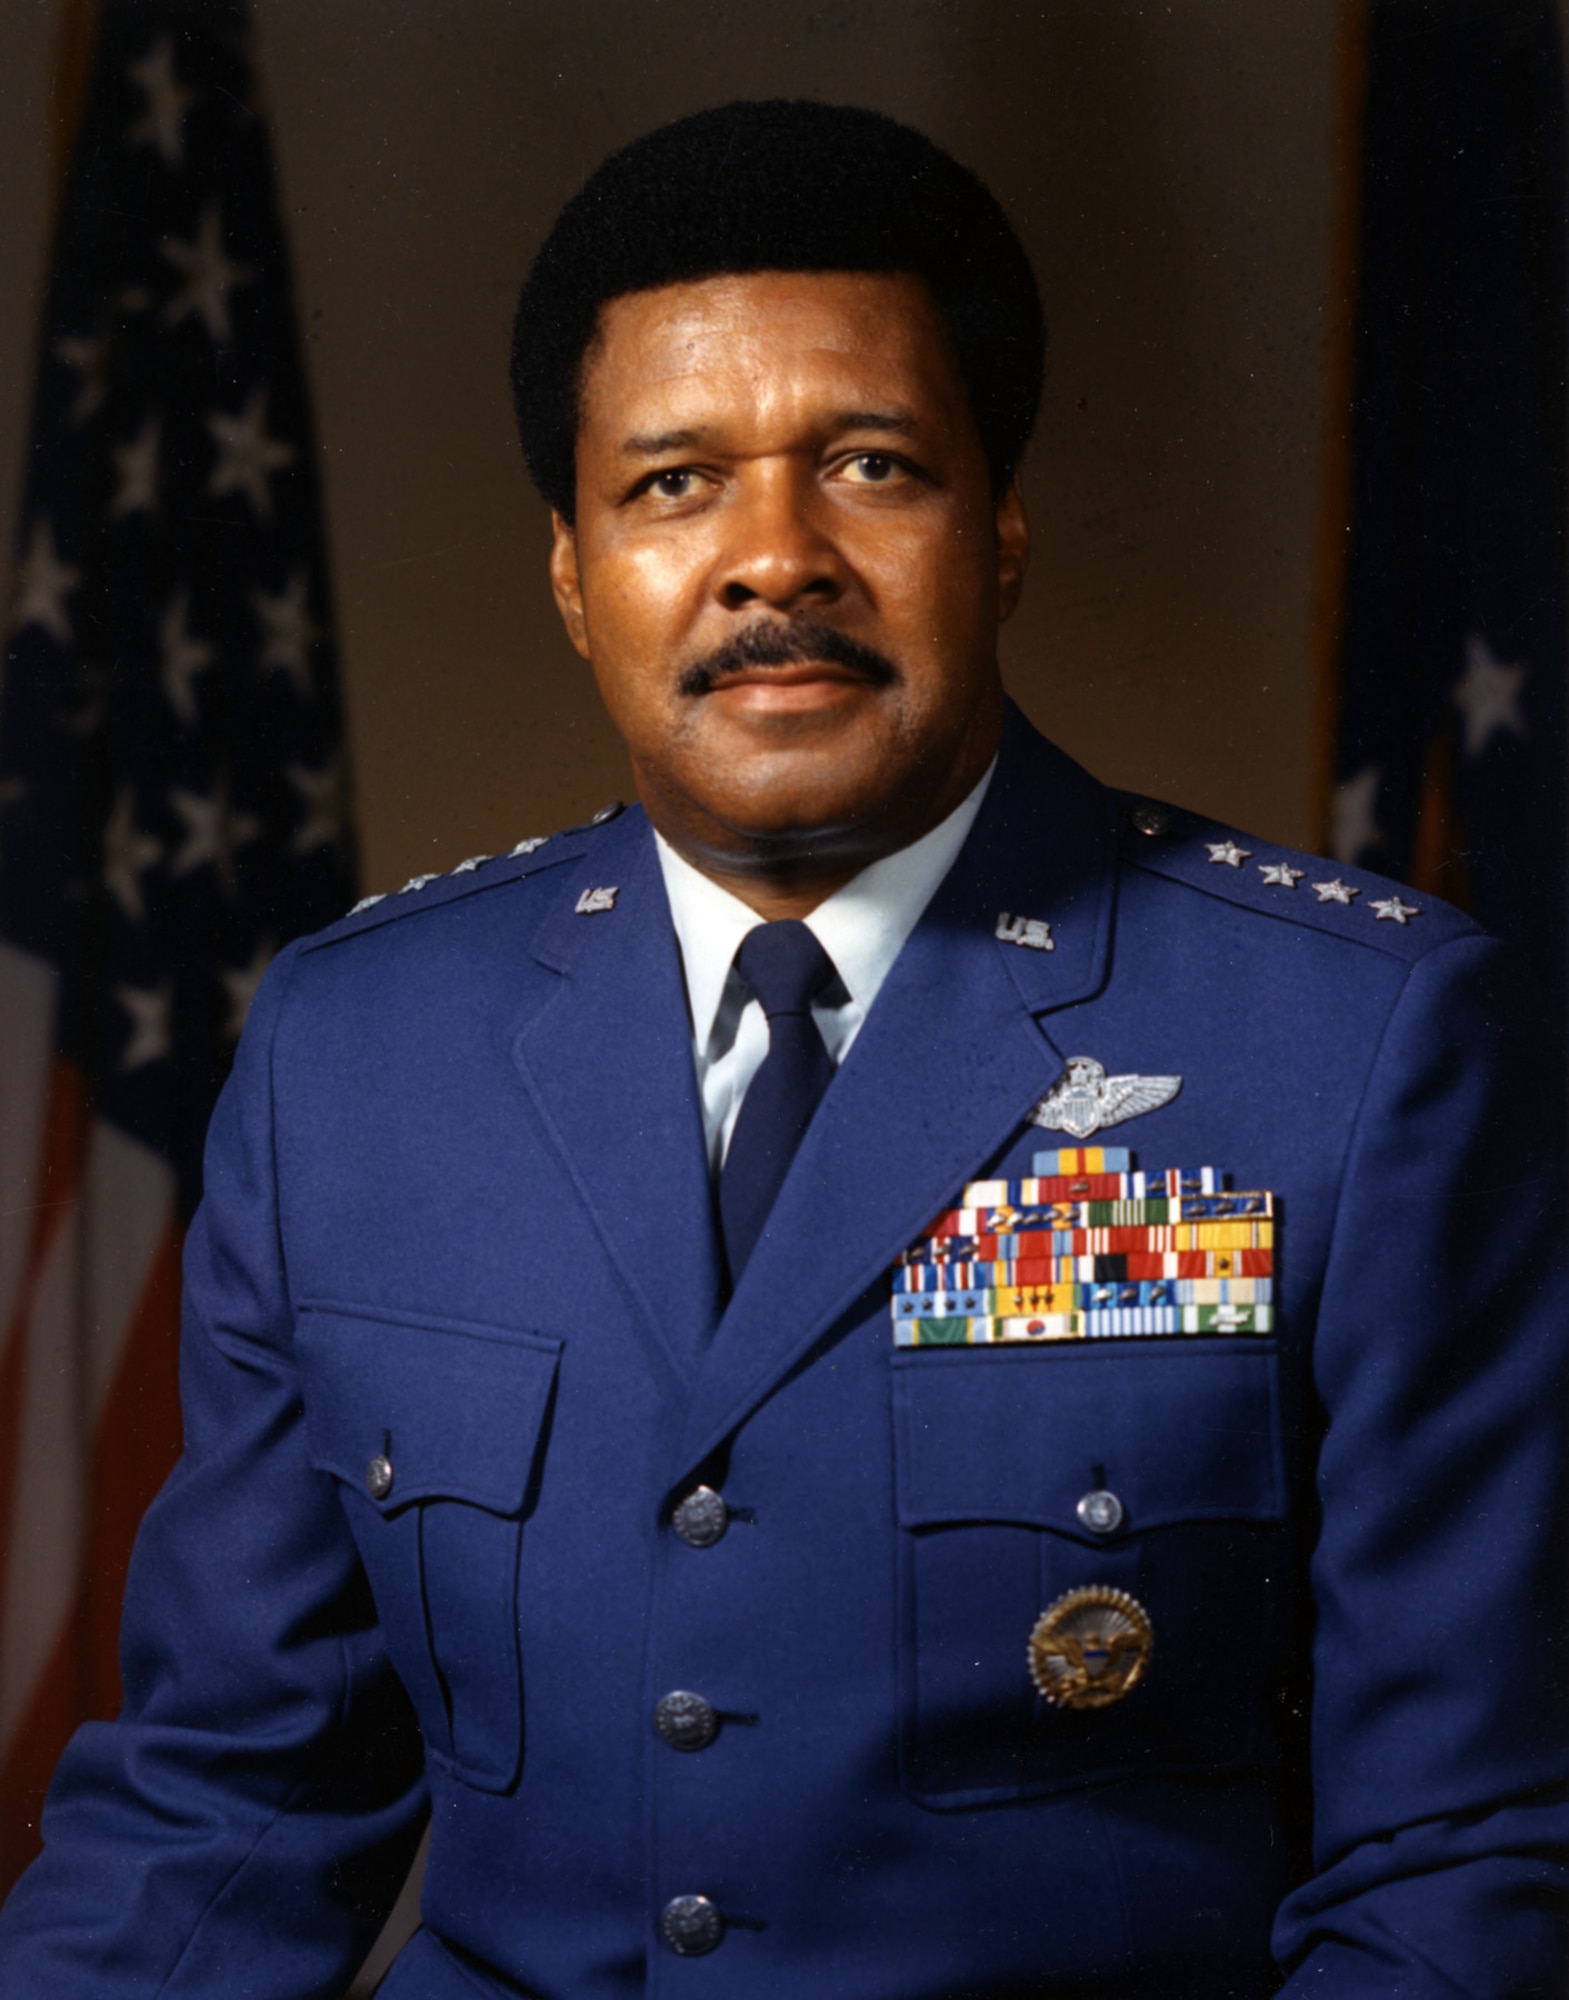 Gen. Daniel R. “Chappie” James Jr. (1920-1978), a Tuskegee Airmen who trained and served during World War II, in 1975 became the first African American to achieve the grade of four-star general. (U.S. Air Force photo)